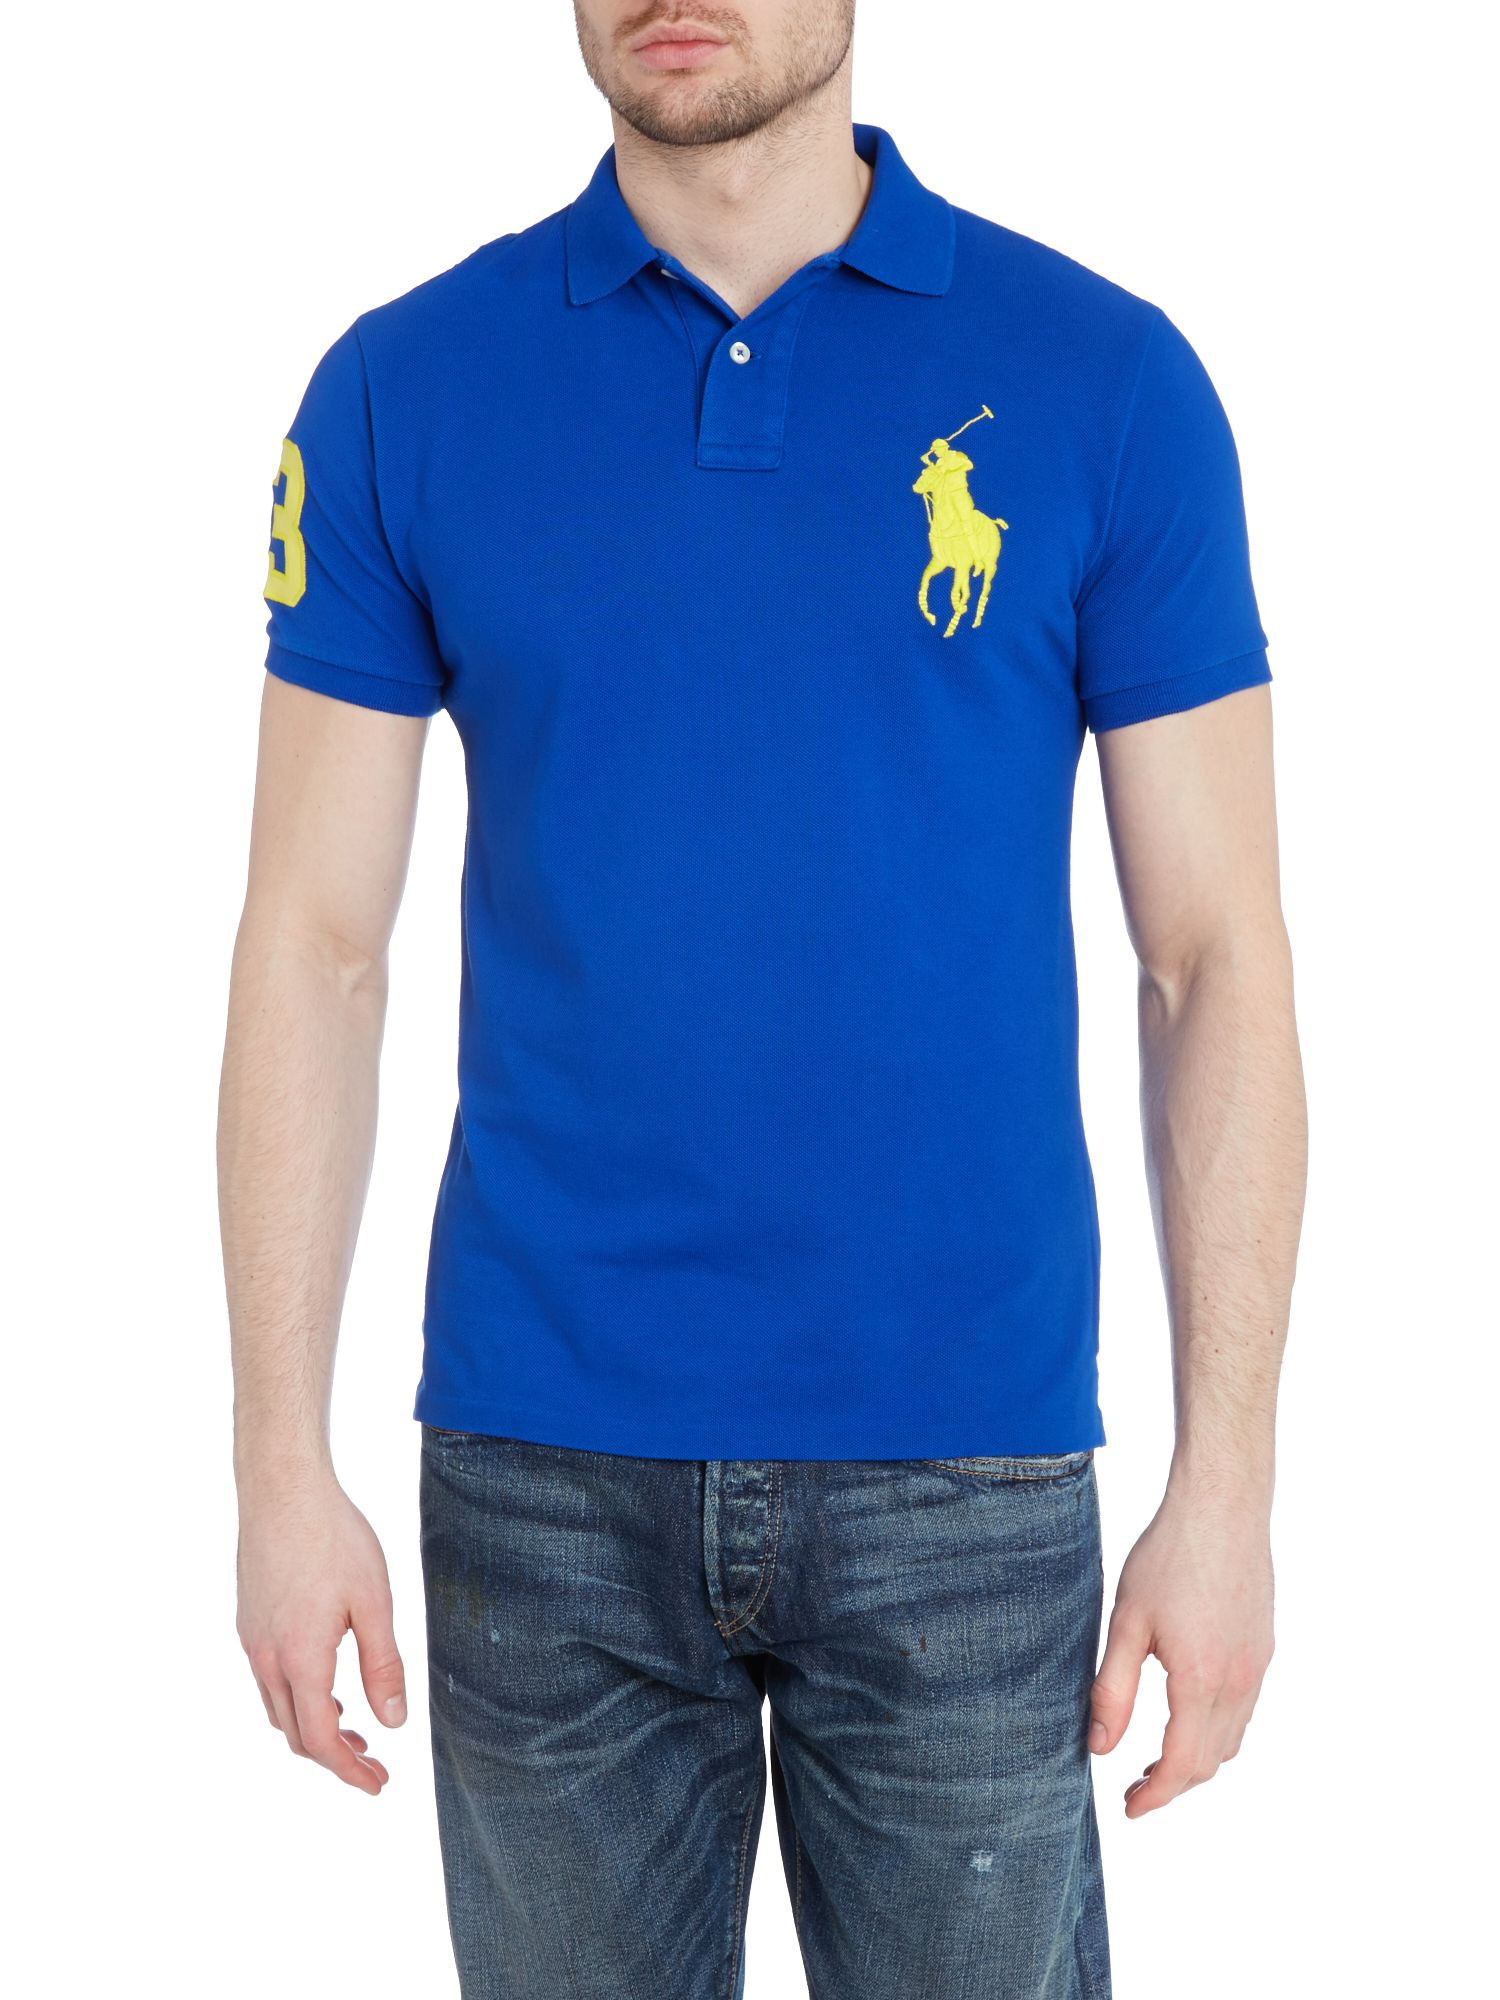 Polo ralph lauren Big Pony 3 Sleeve Slim Fit Polo Shirt in Blue for Men ...